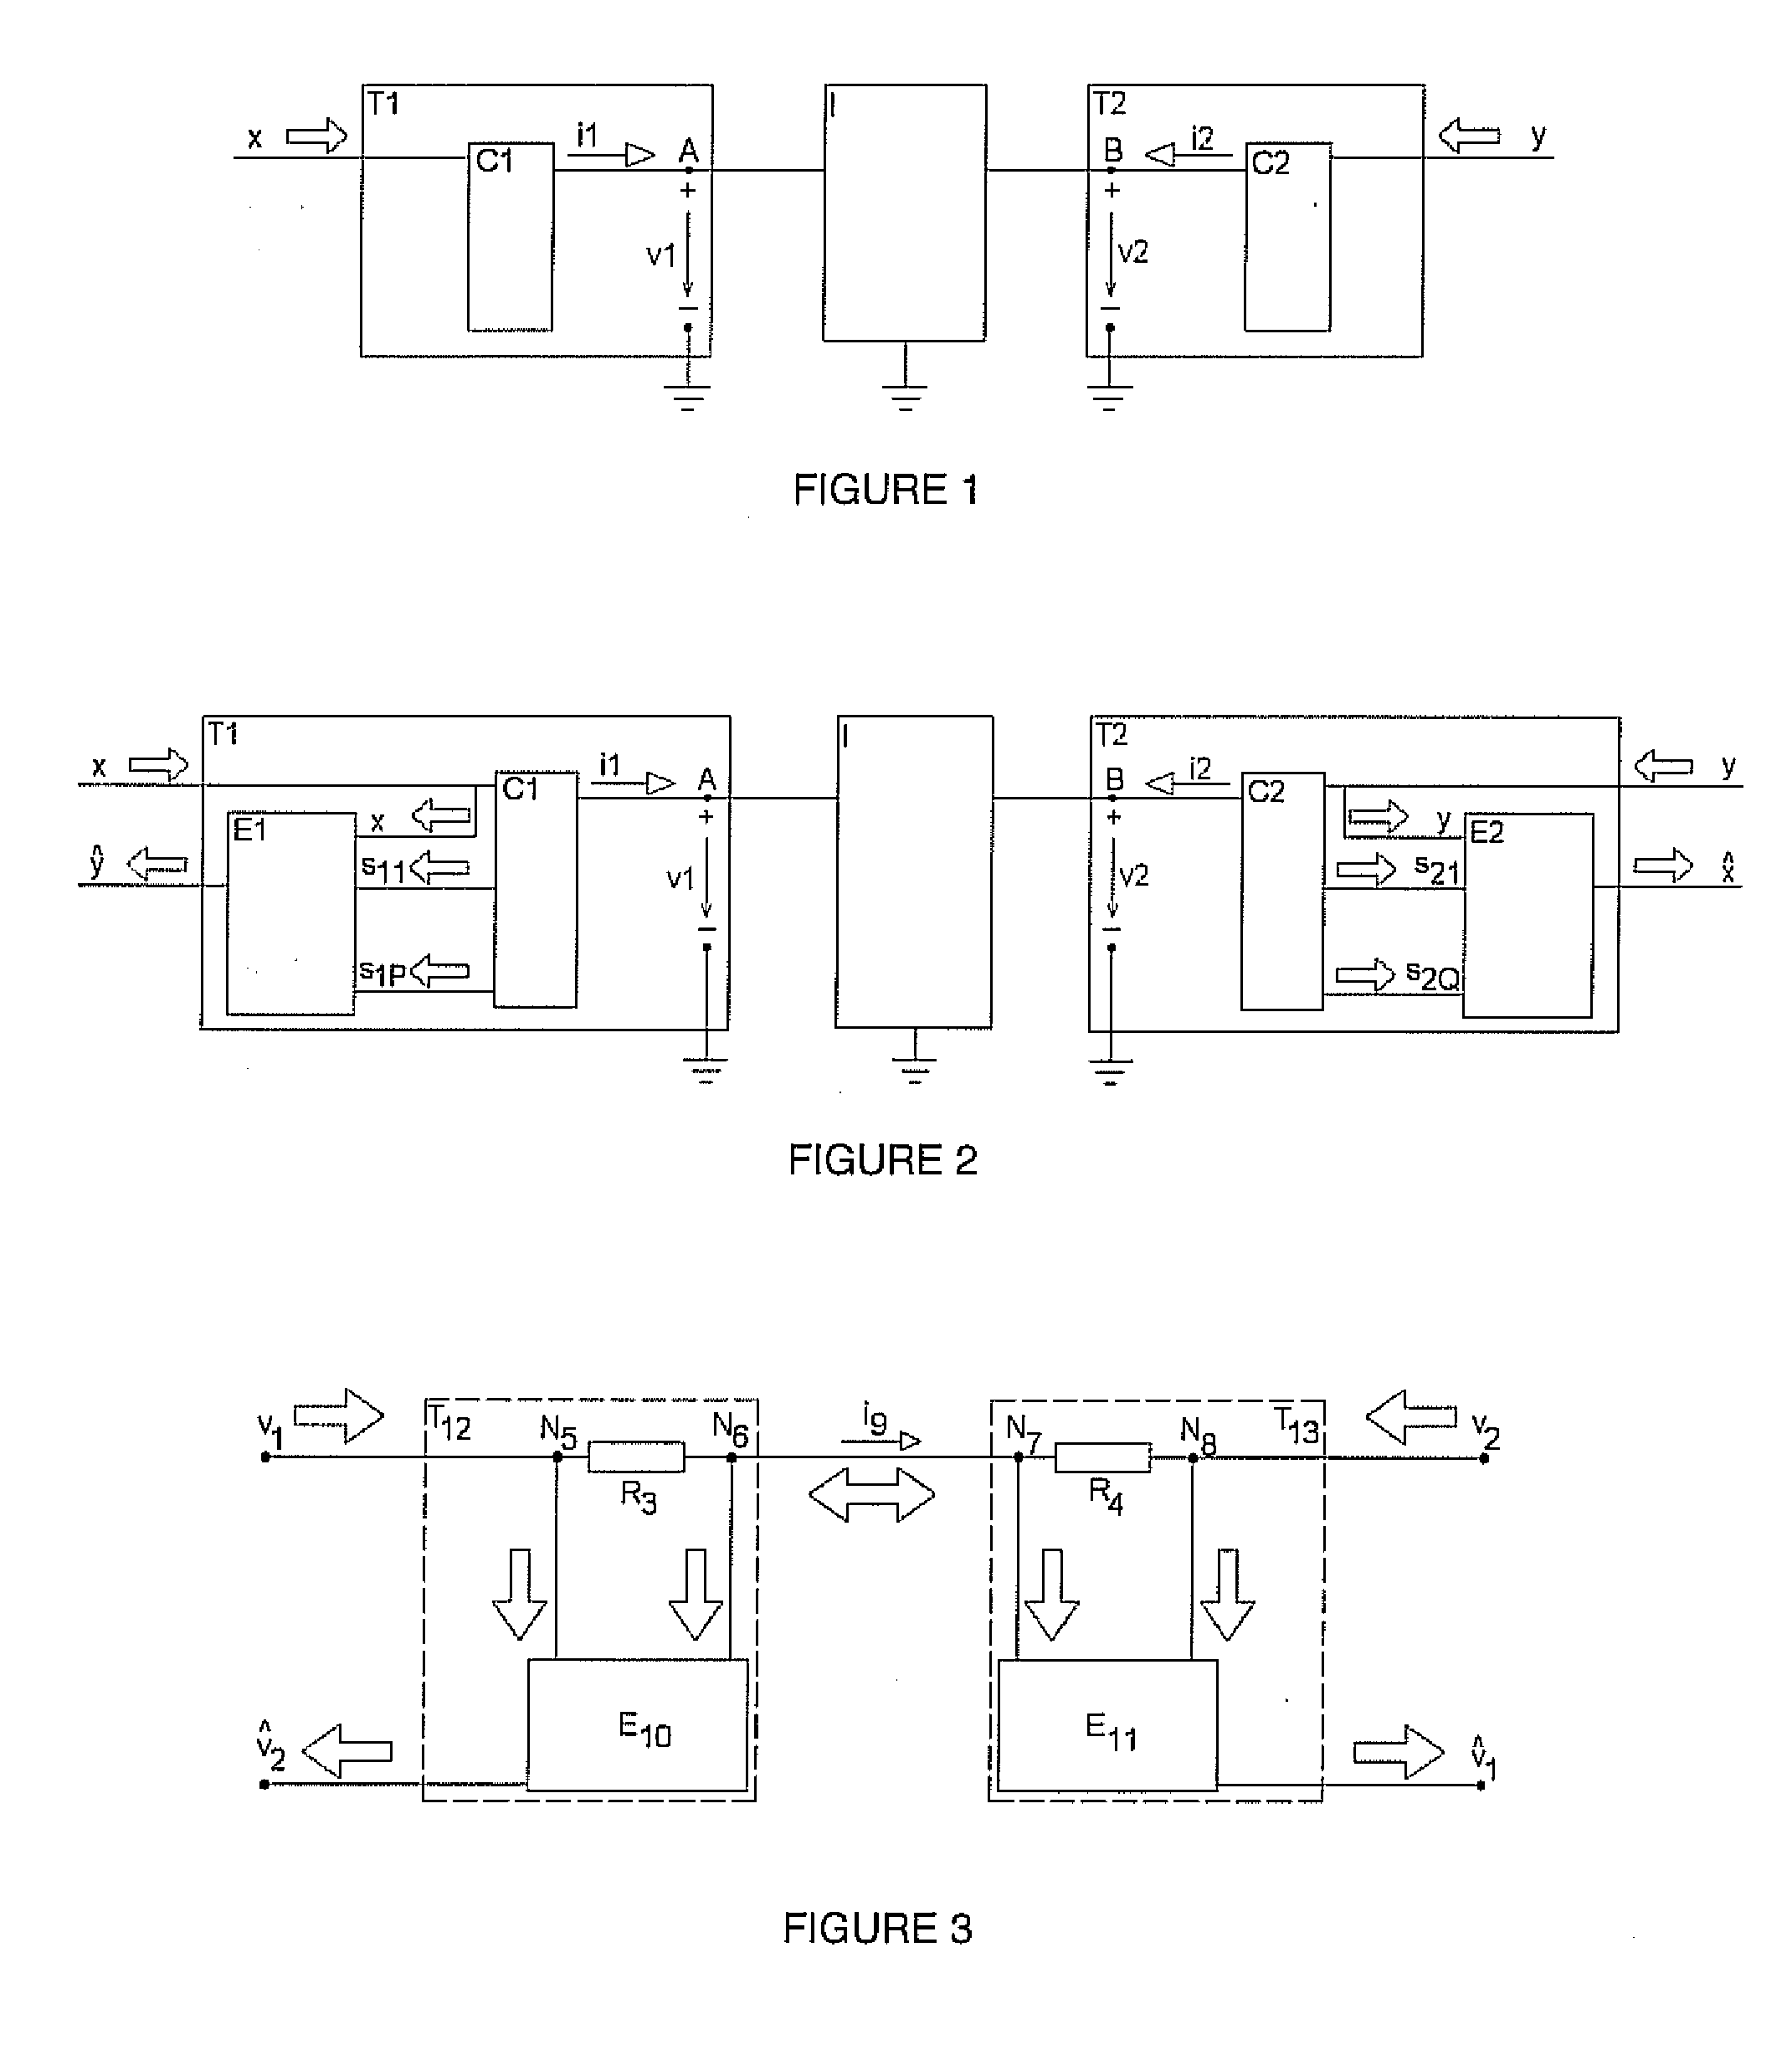 Simultaneous full-duplex communication over a single electrical conductor